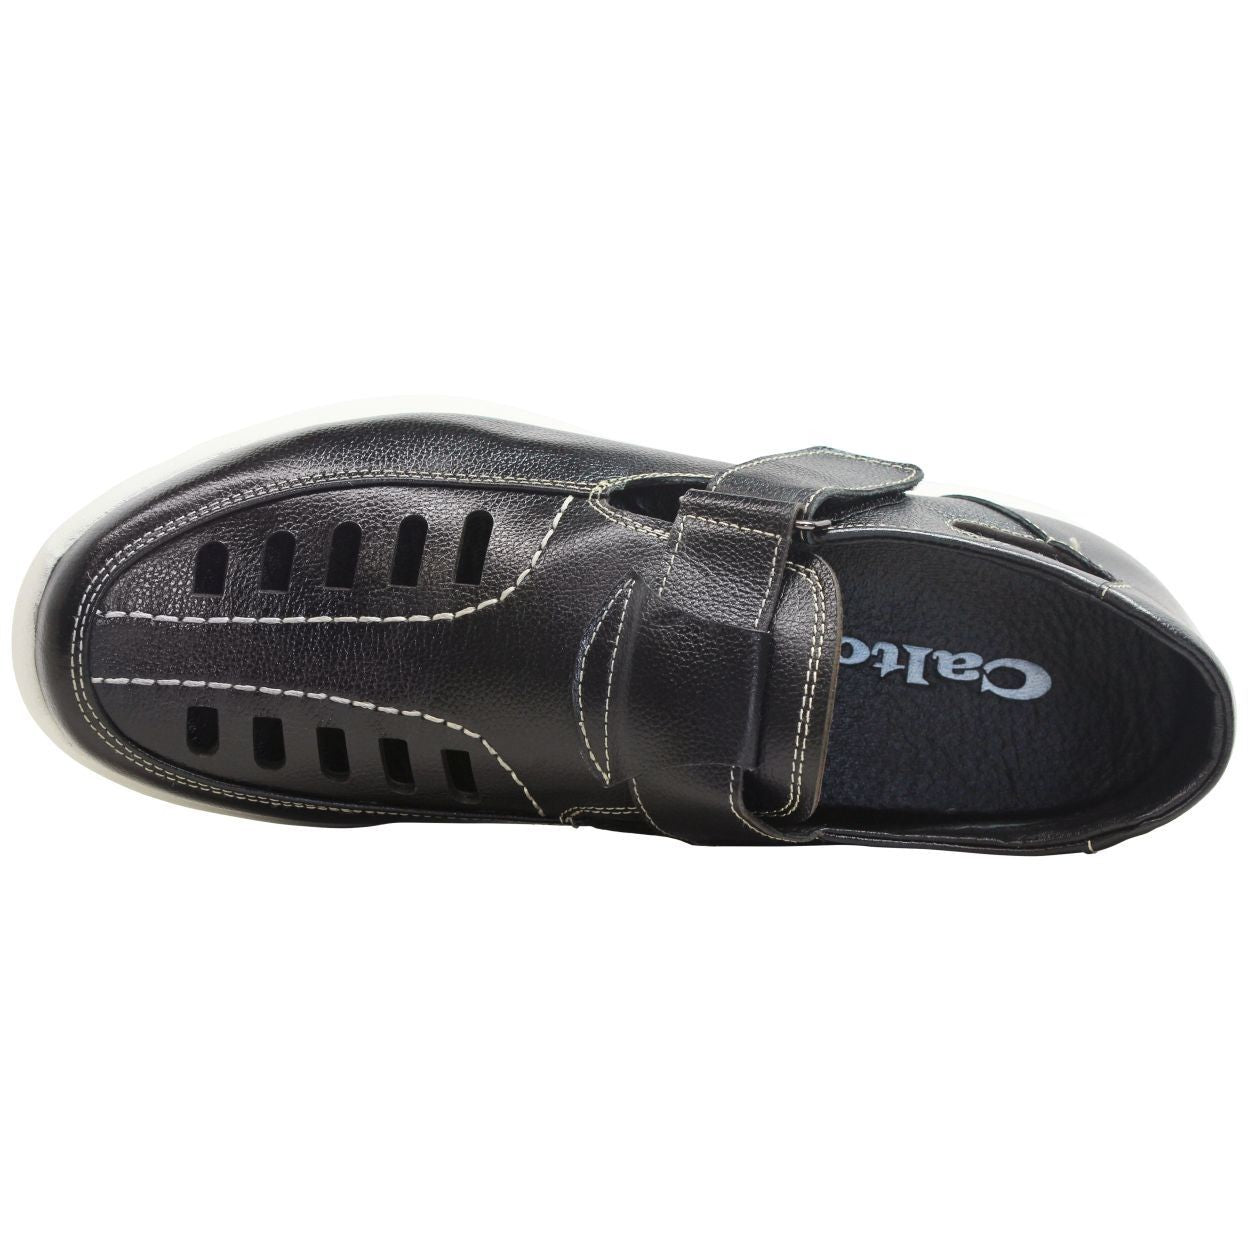 Elevator shoes height increase CALTO - T9285 - 2.8 Inches Taller (Black) - Super Lightweight - Size 9 Only